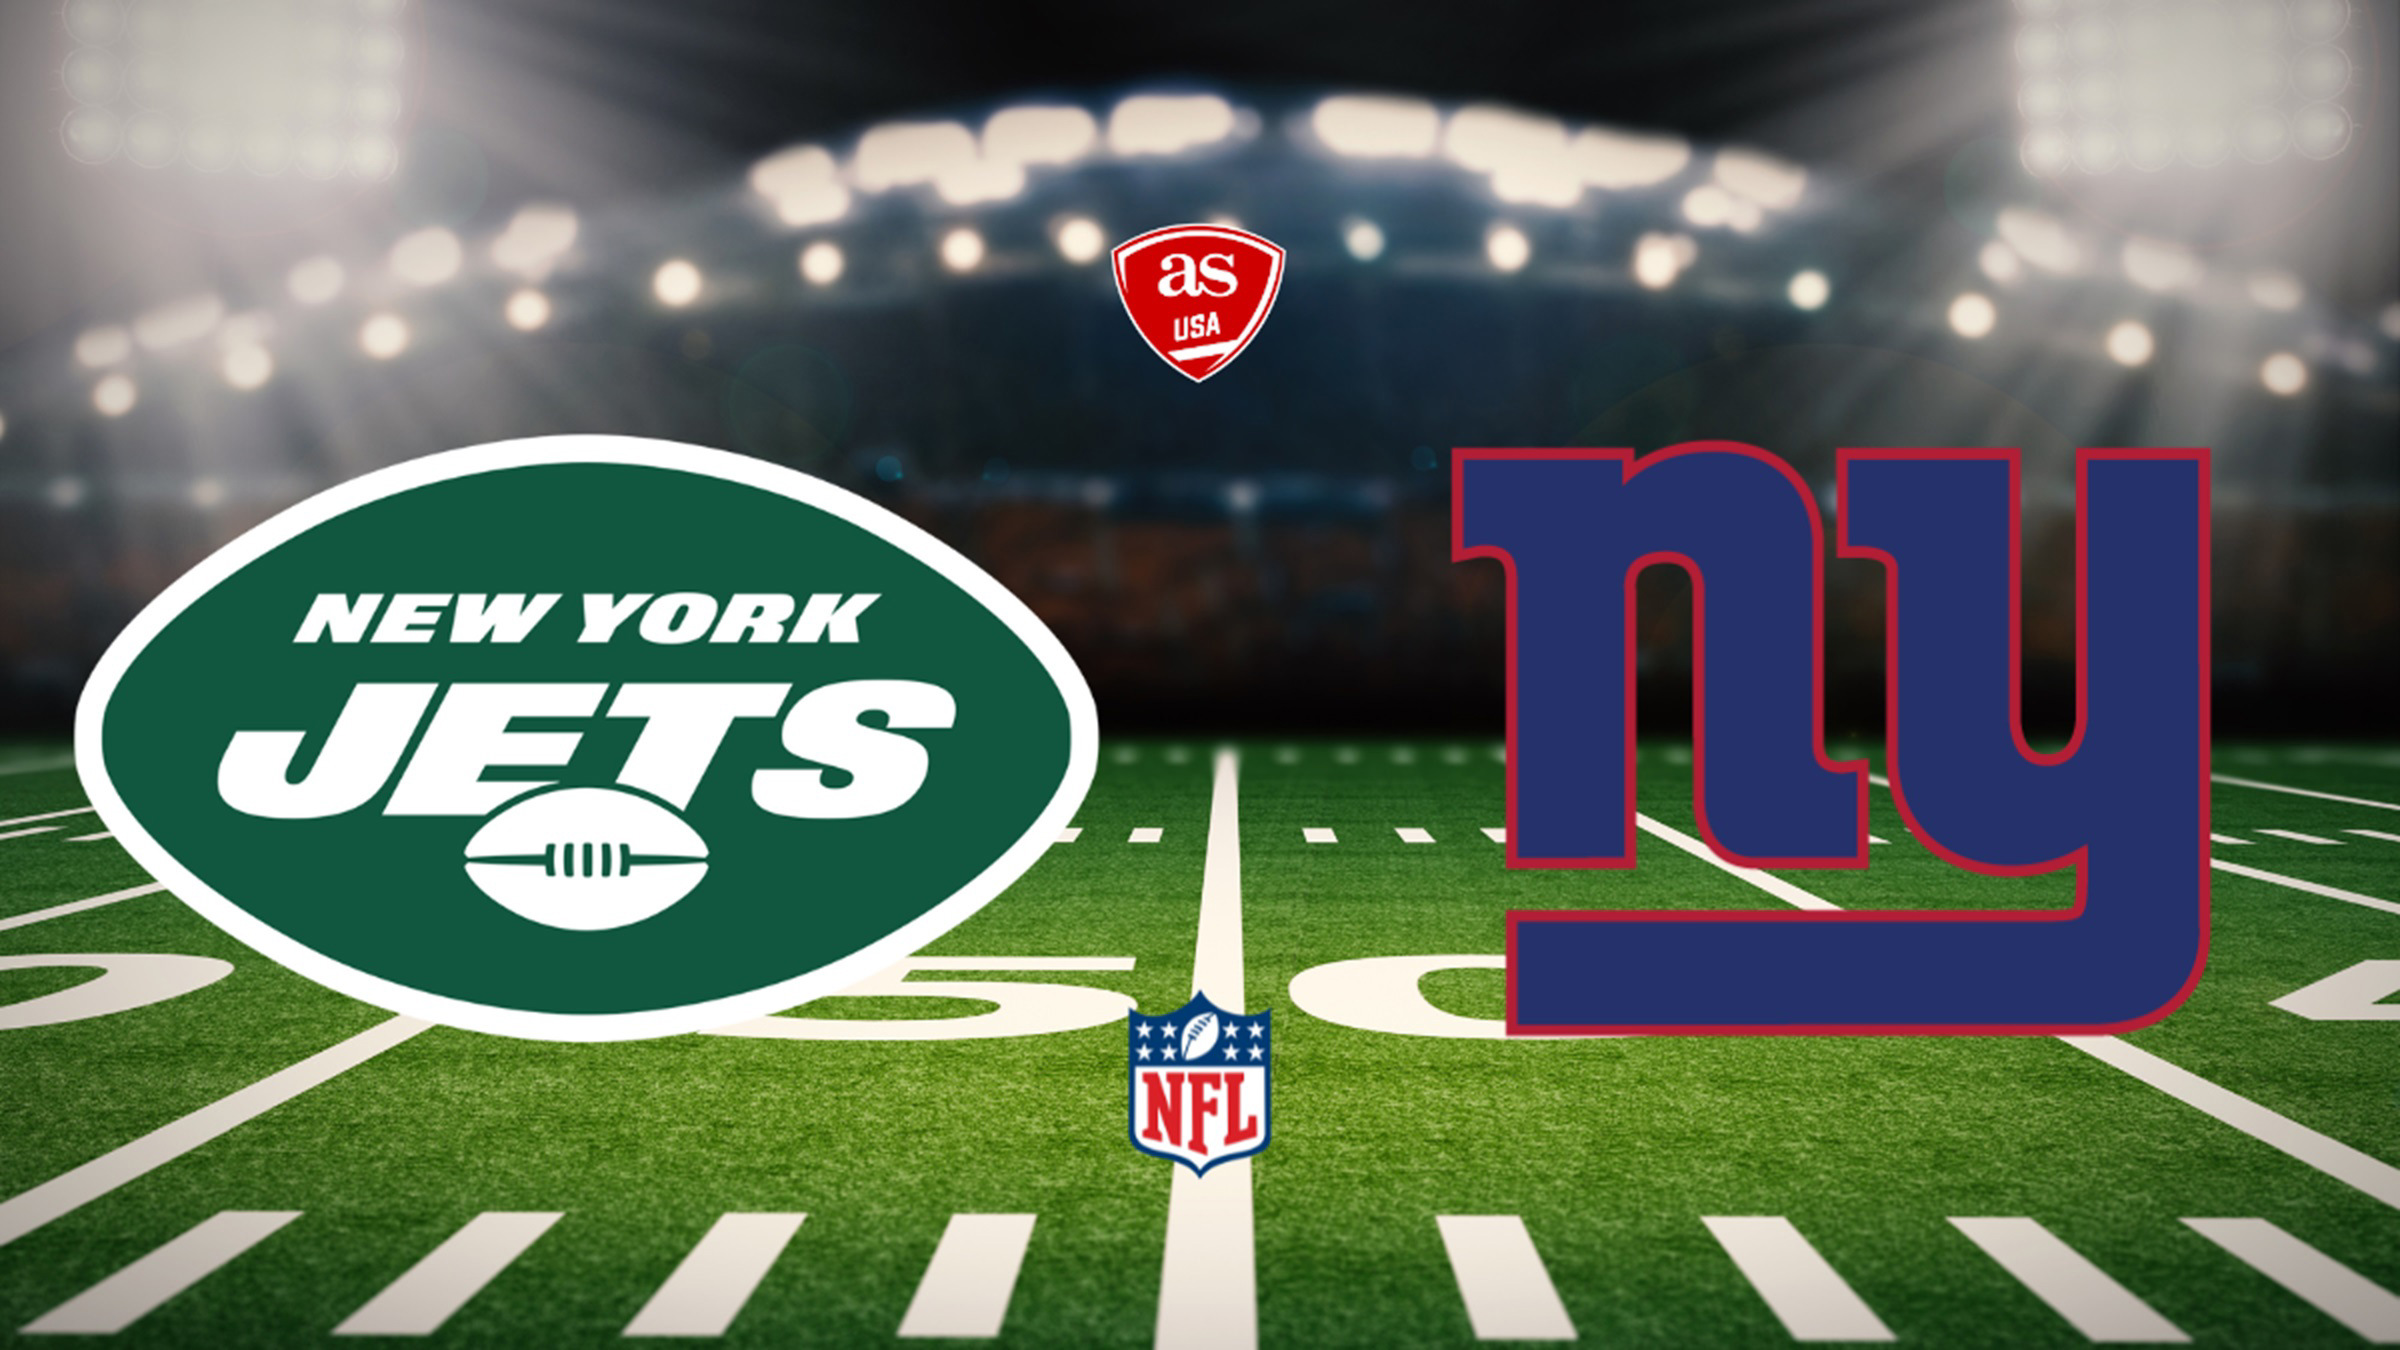 New York Jets vs New York Giants times, how to watch on TV and stream